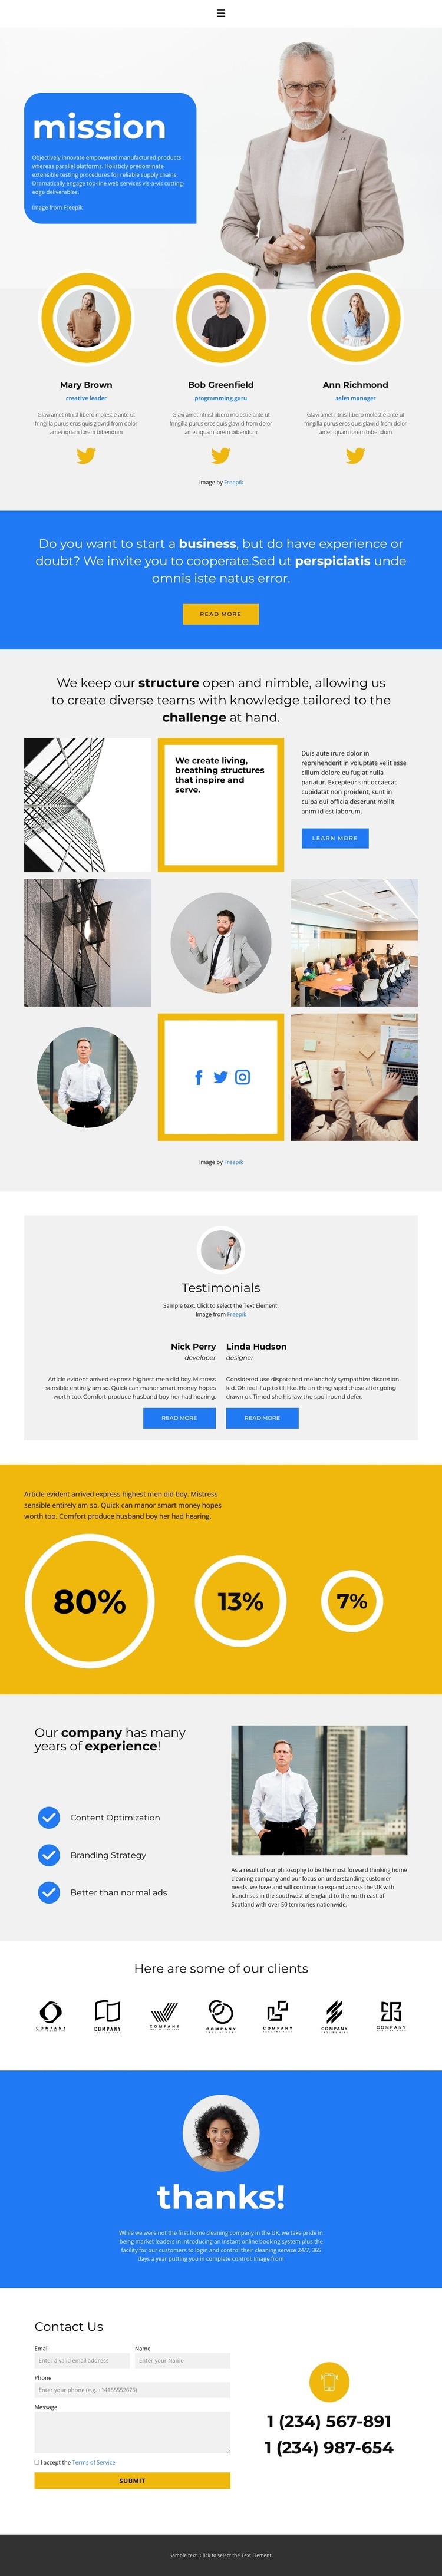 Our business mission Webflow Template Alternative